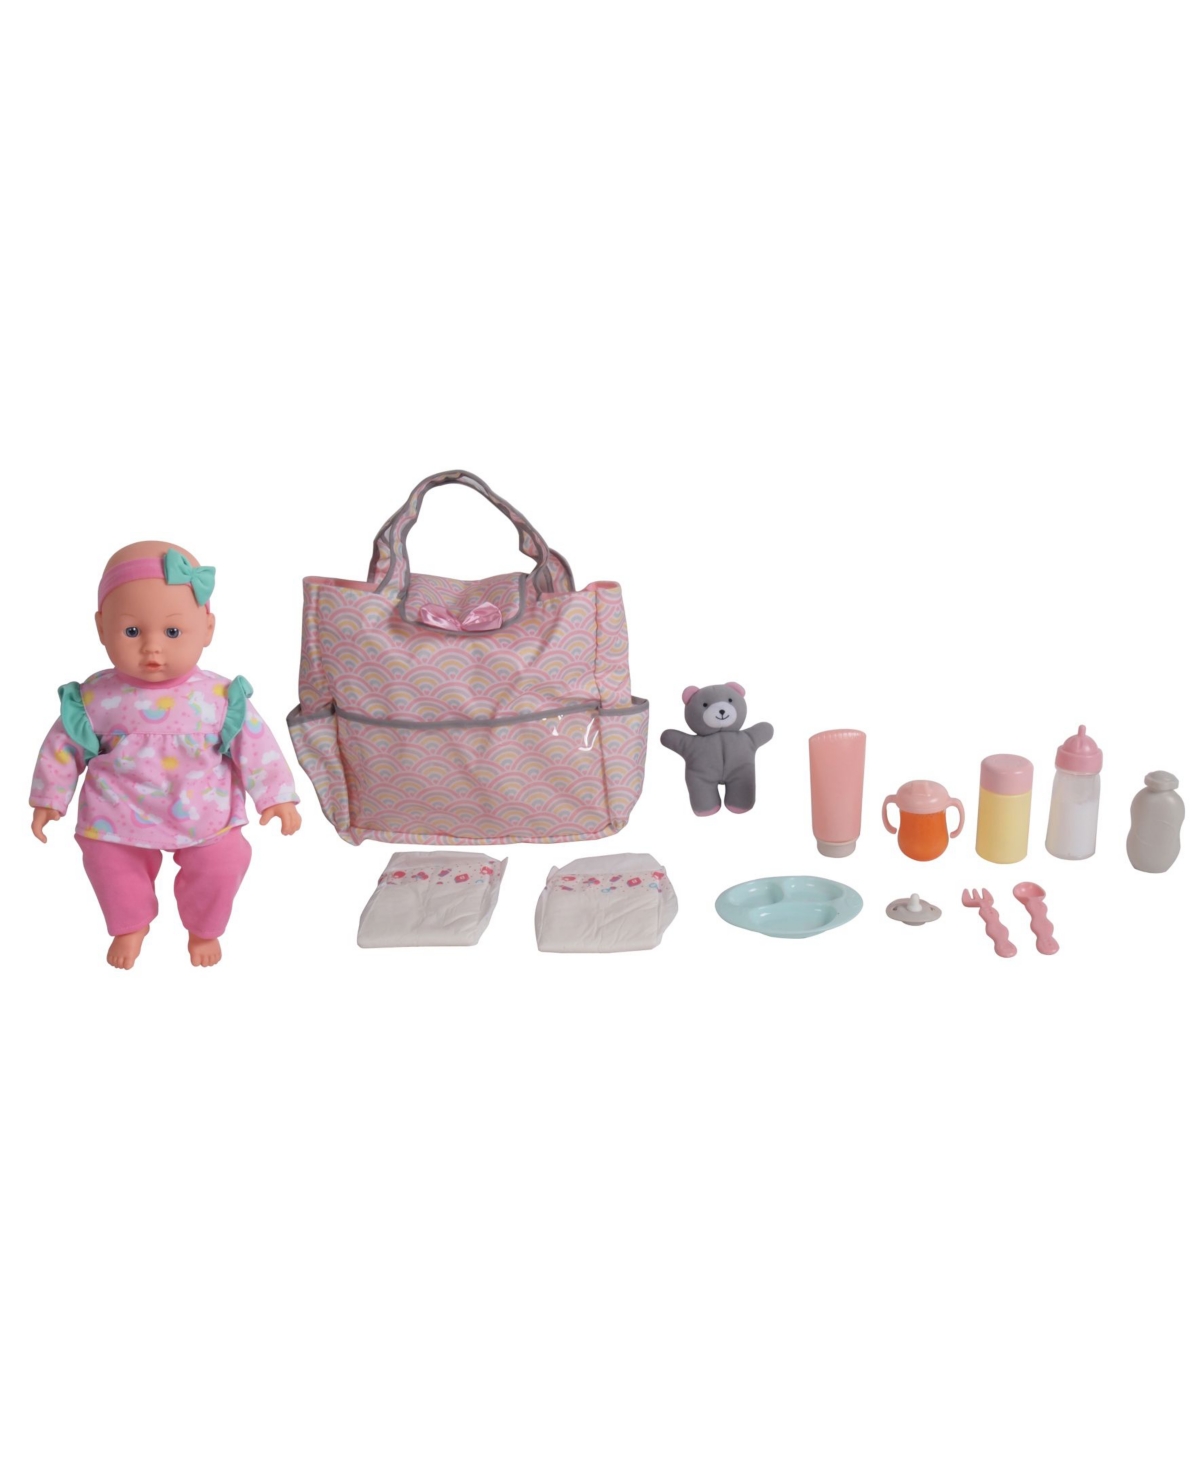 Redbox Dream Collection 14" Pretend Play Baby Doll With Diaper Bag Accessories Set In Multi